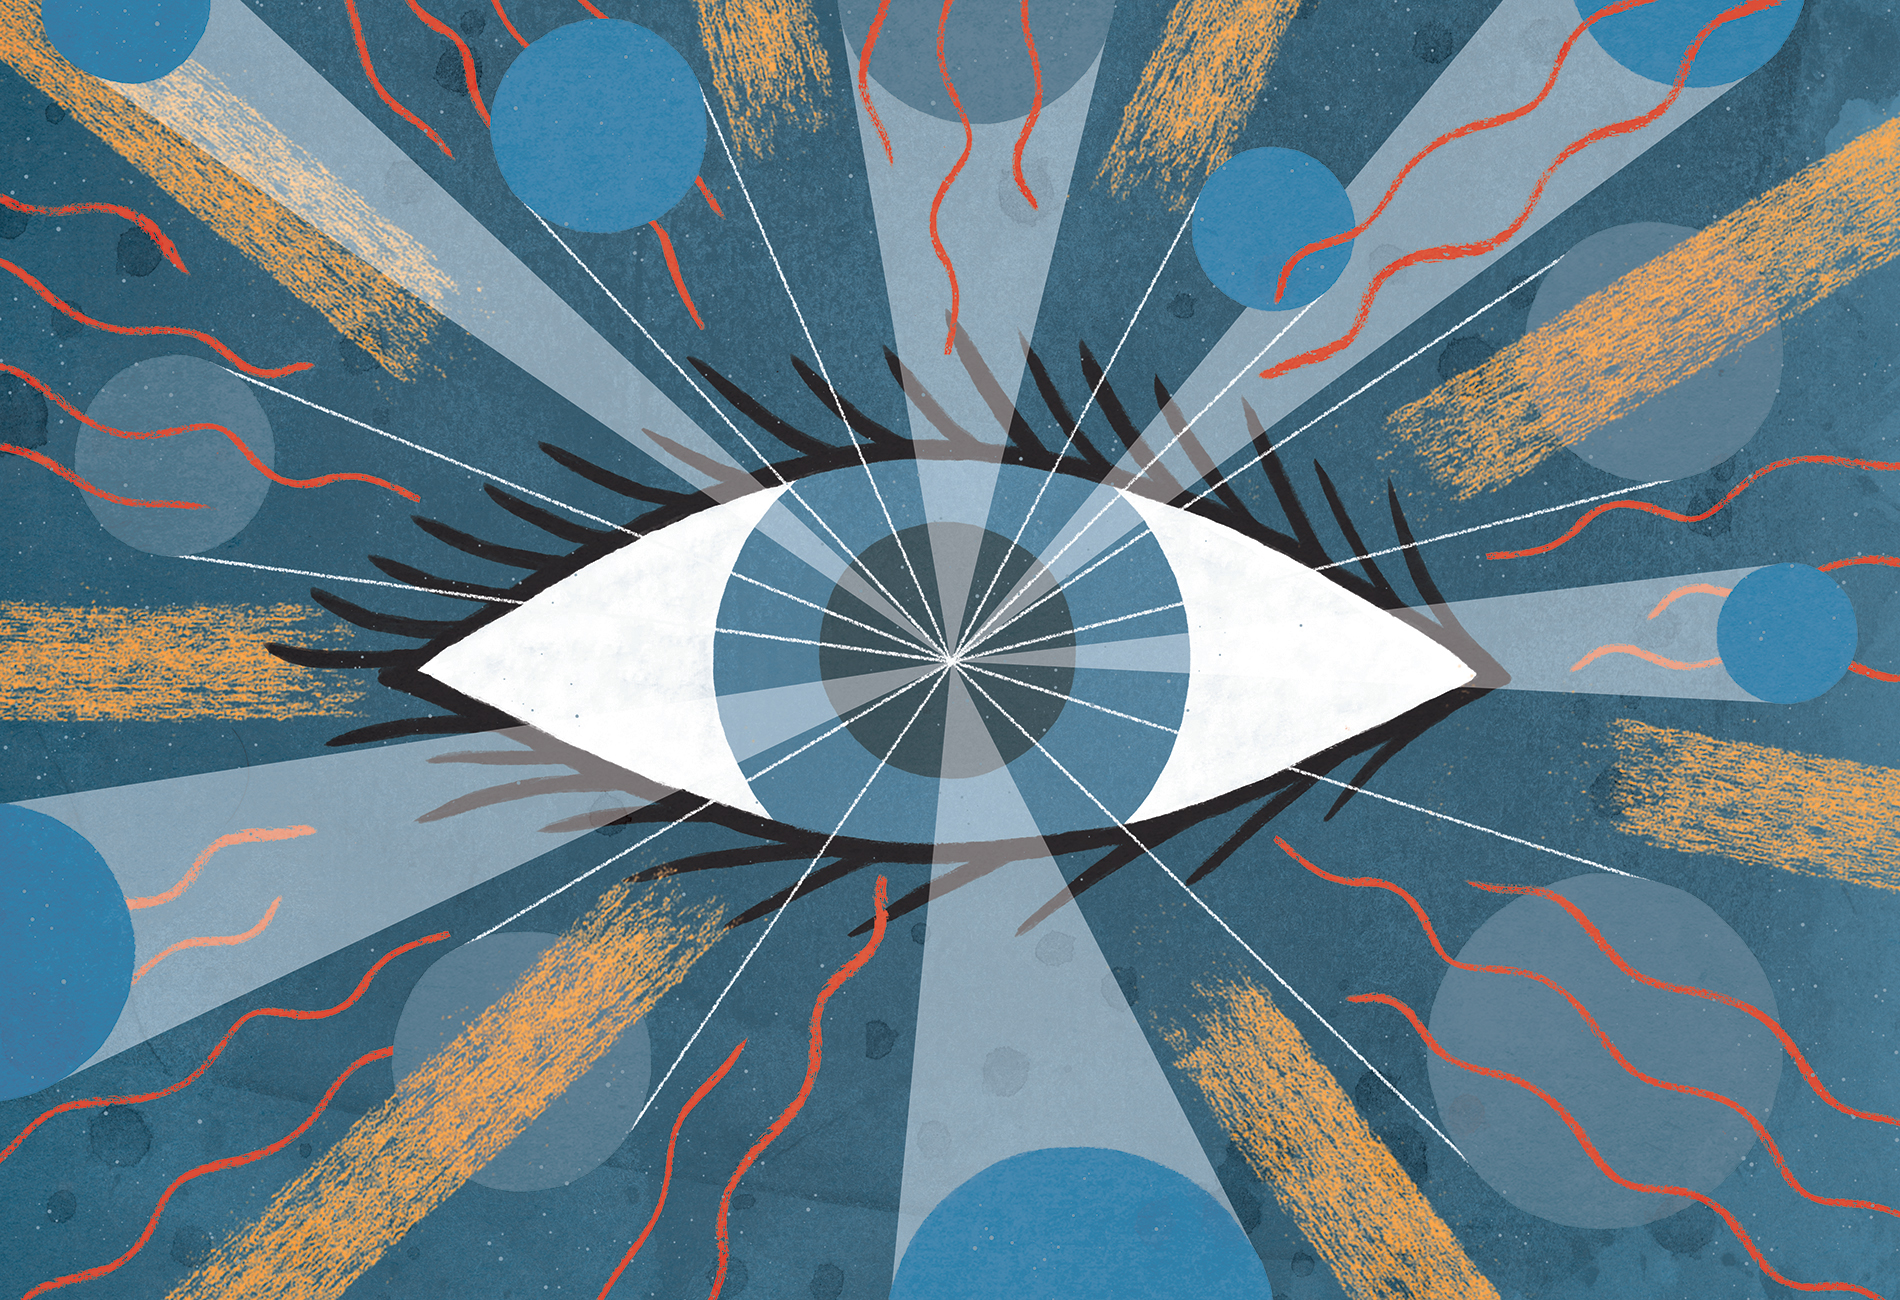 Illustration shows a central eye with different patterns emerging from it.